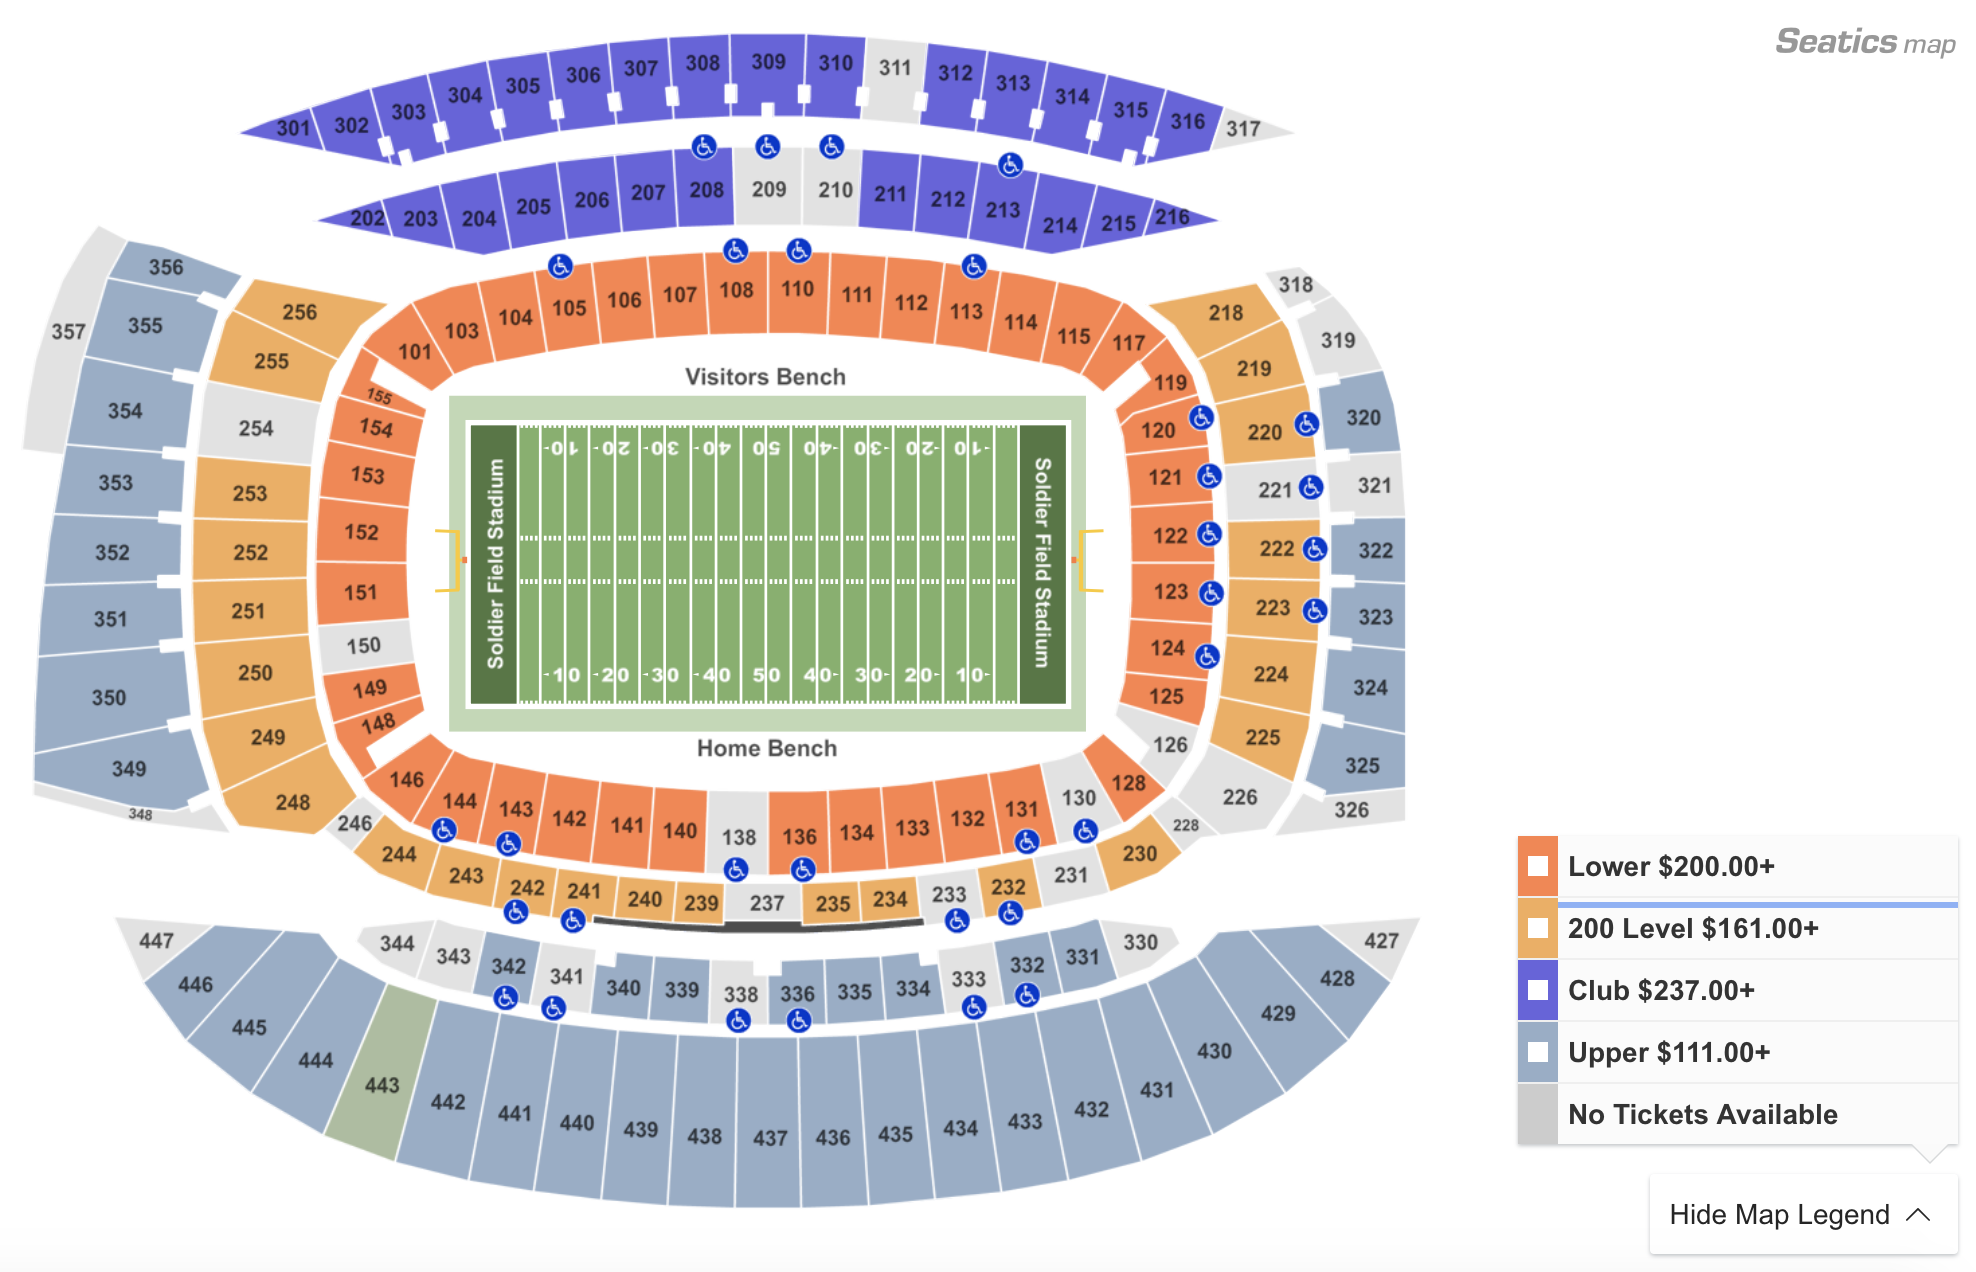 Soldier Field Seating Chart With Seat Numbers